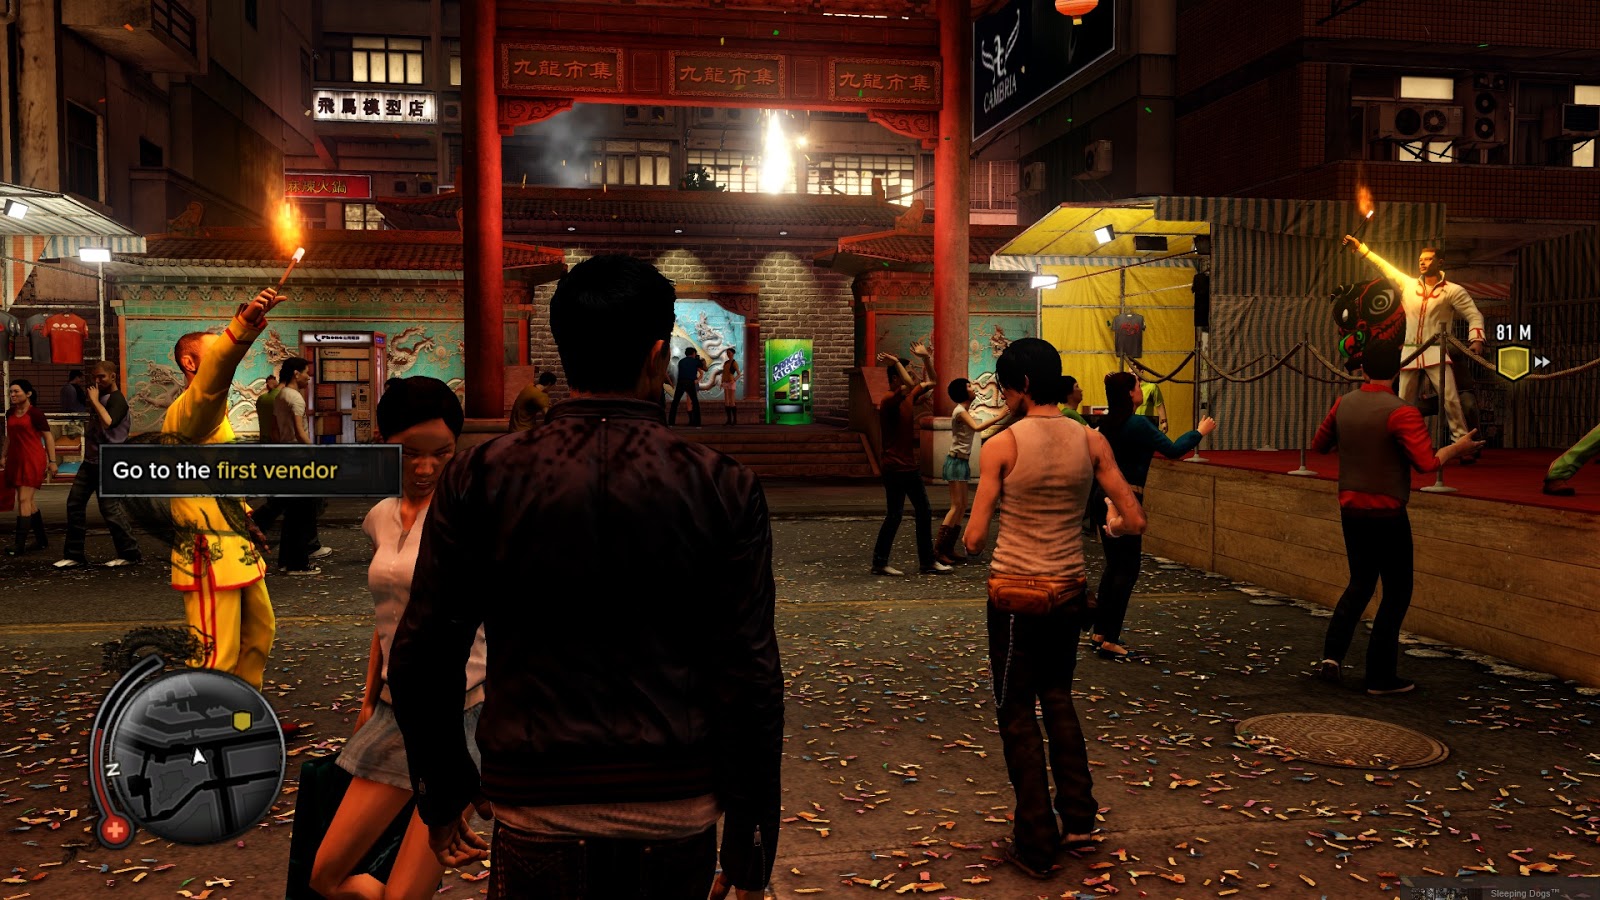 sleeping dogs definitive edition gameplay pc